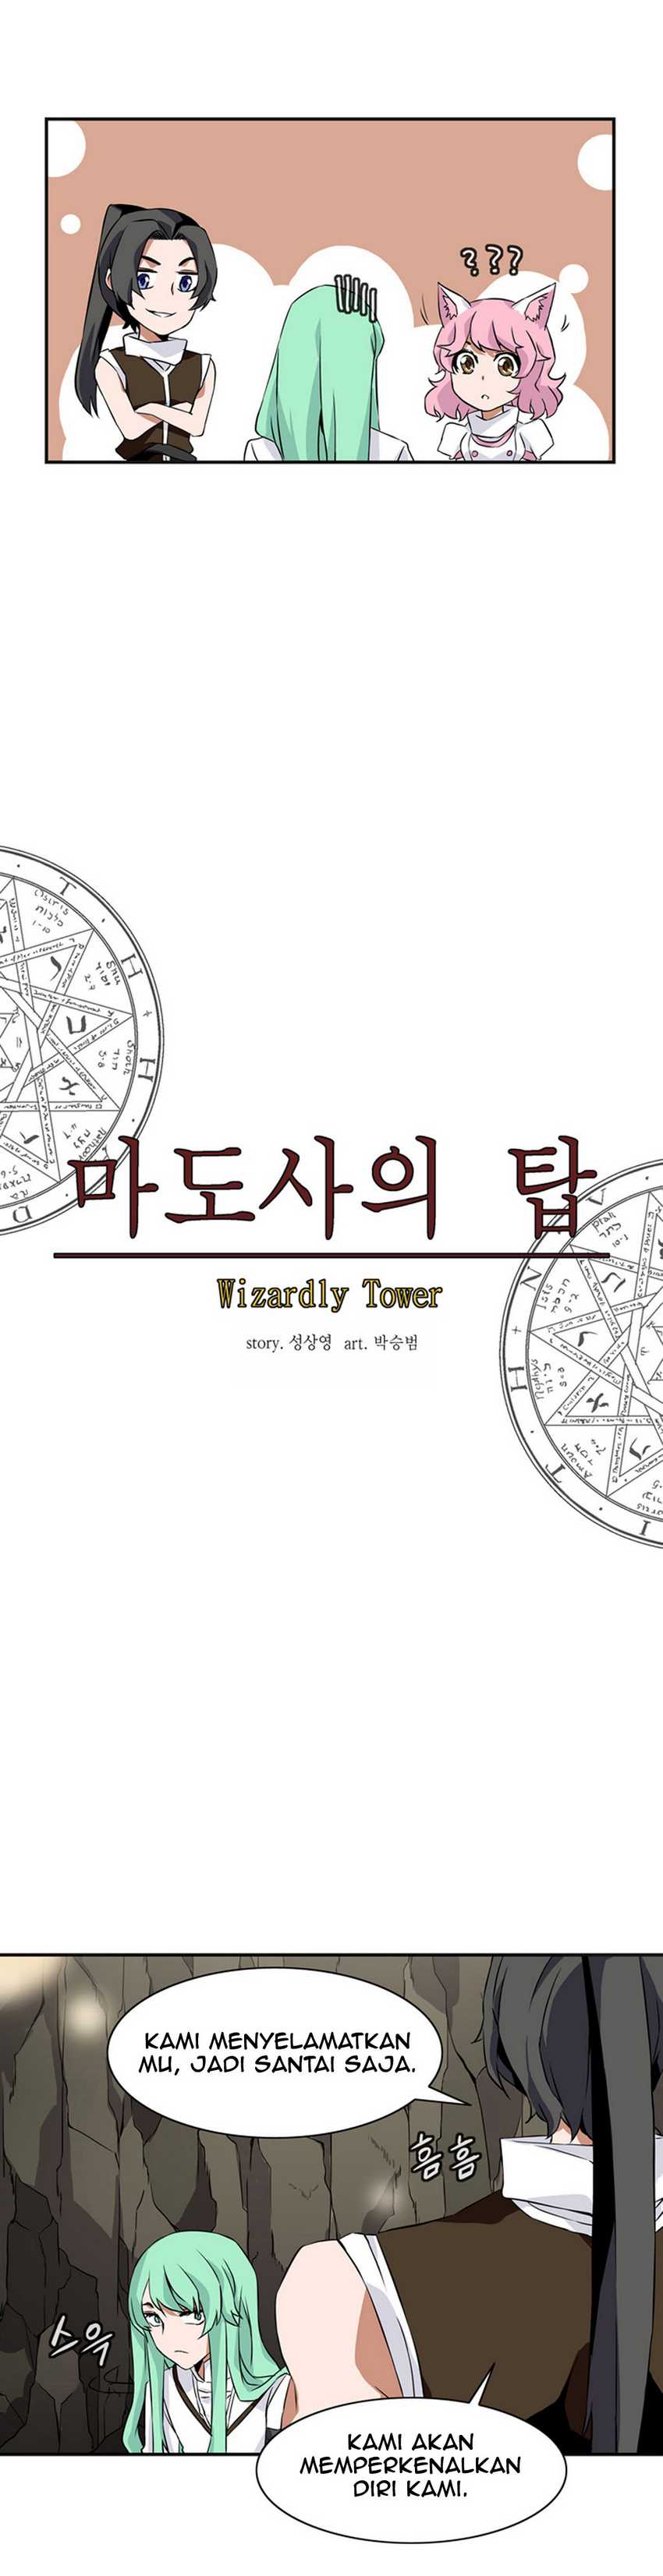 Wizardly Tower Chapter 13